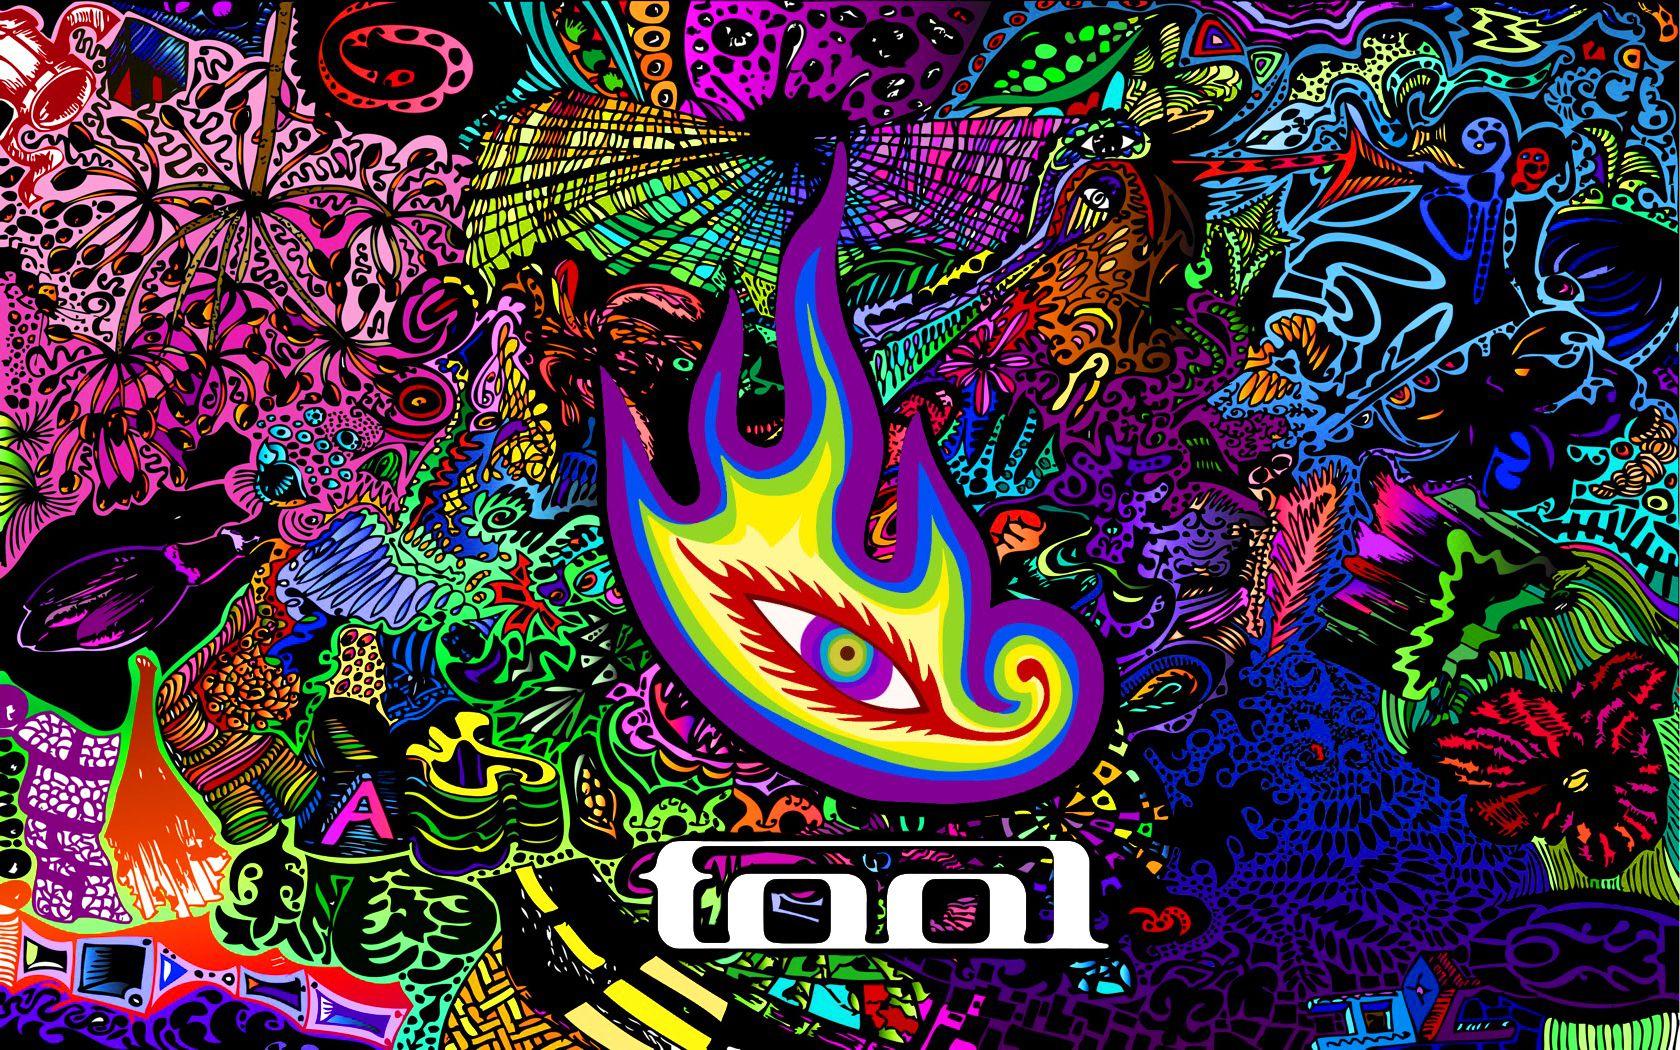 tool band wallpapers wallpaper cave on tool band wallpapers